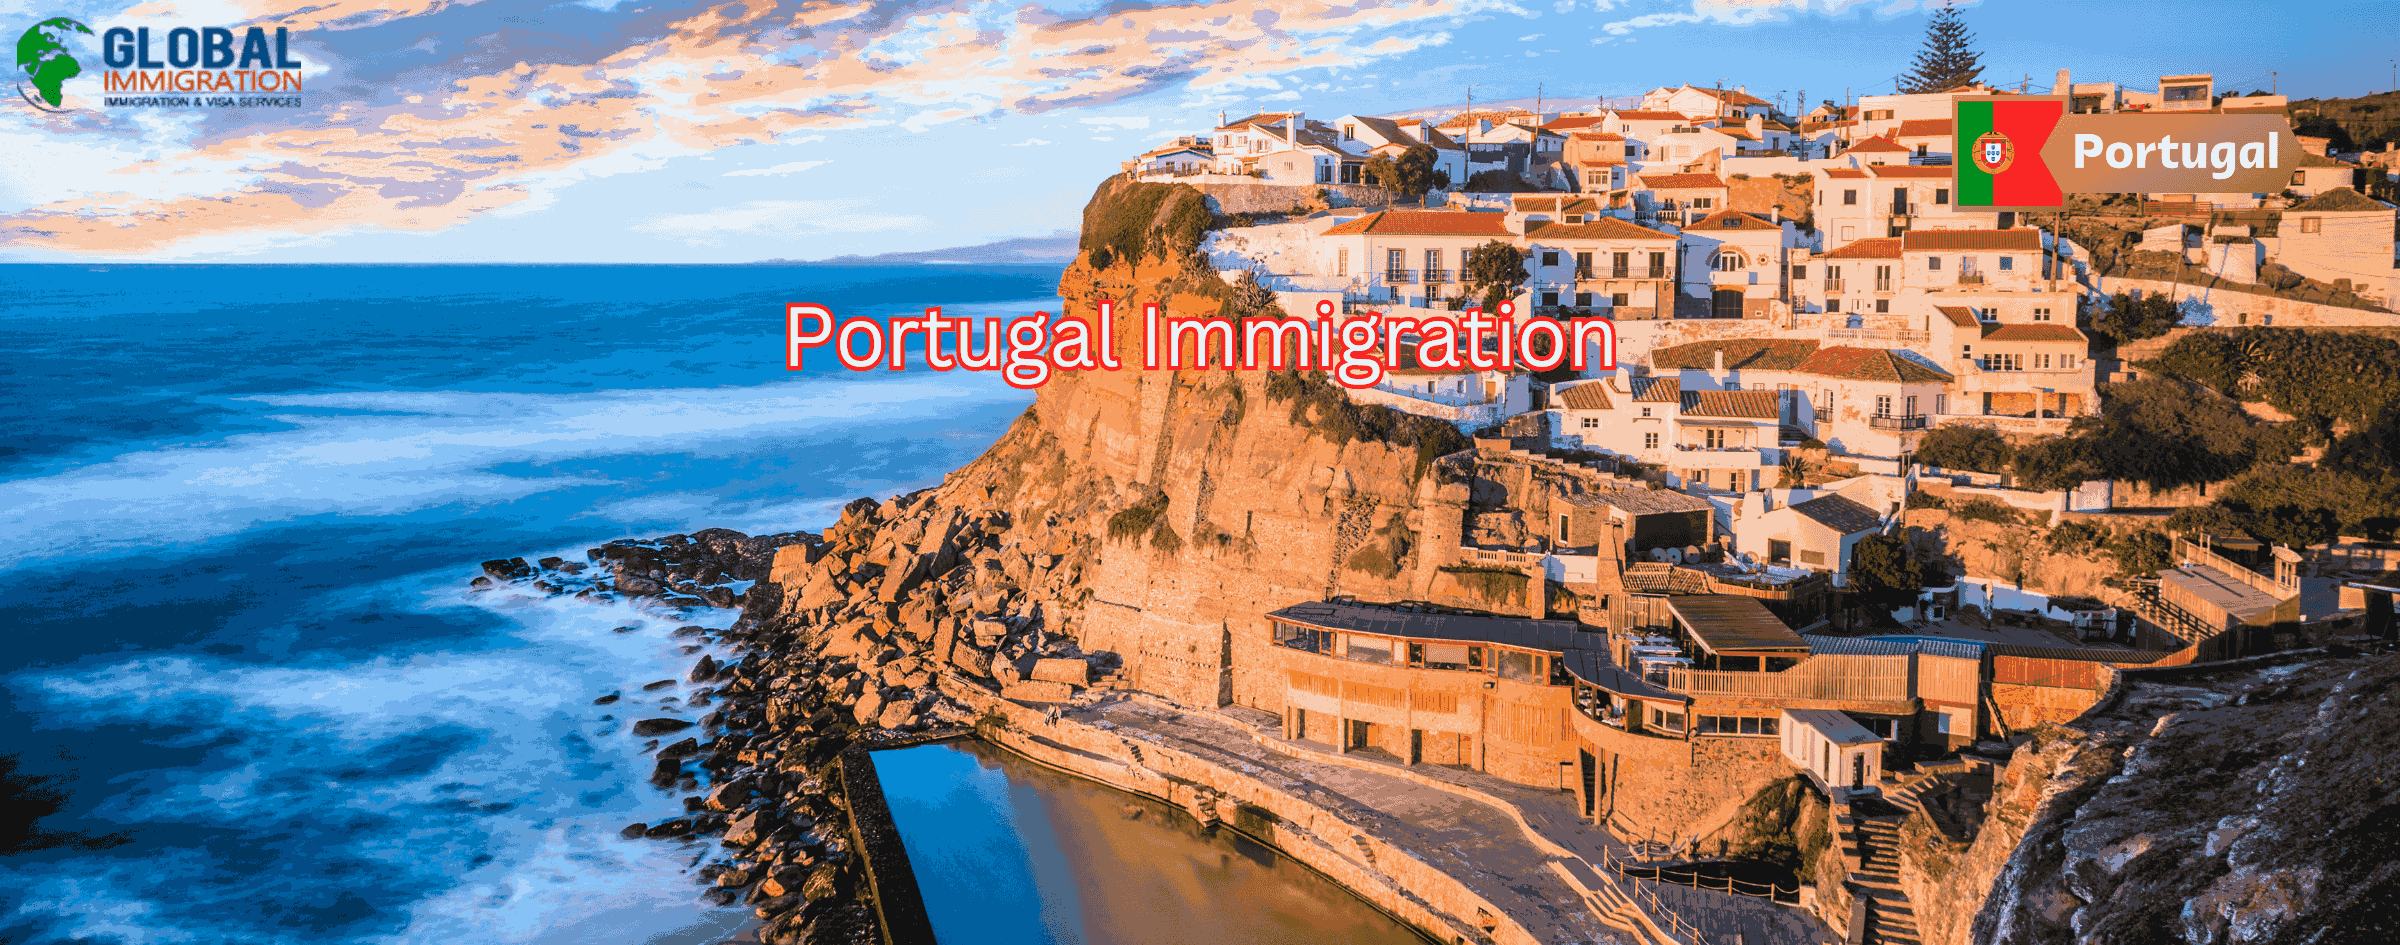 Denmark Immigration Services 7289959595